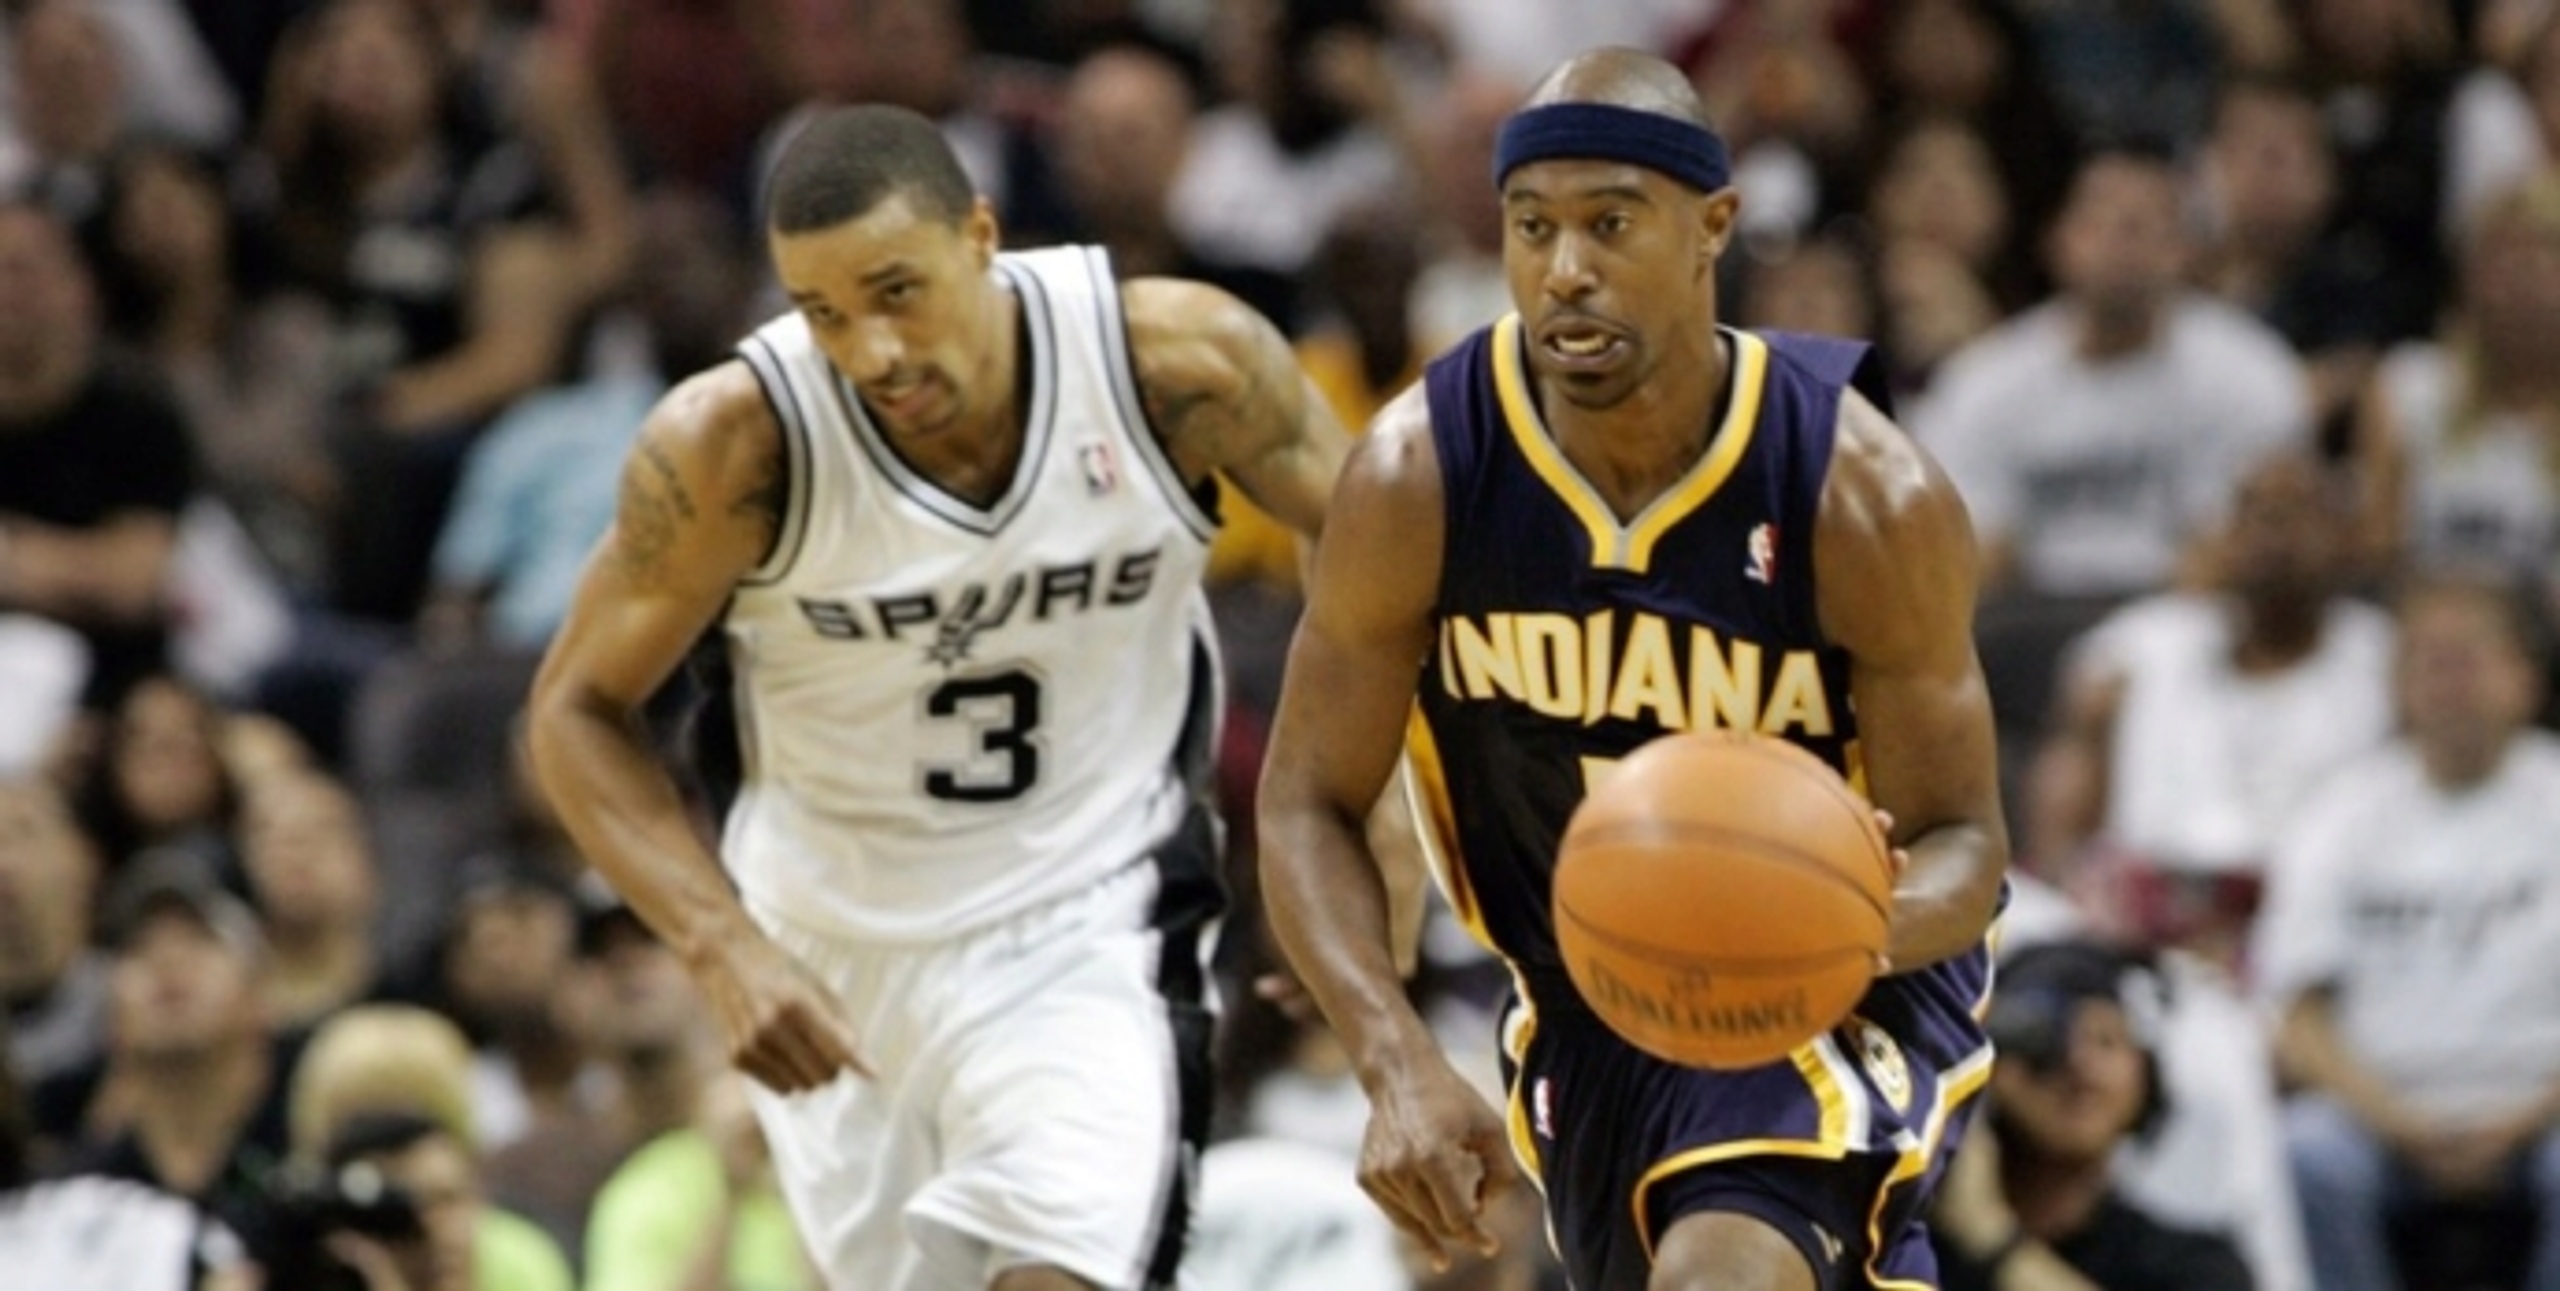 James Posey interviews T.J. Ford about upbringing, career